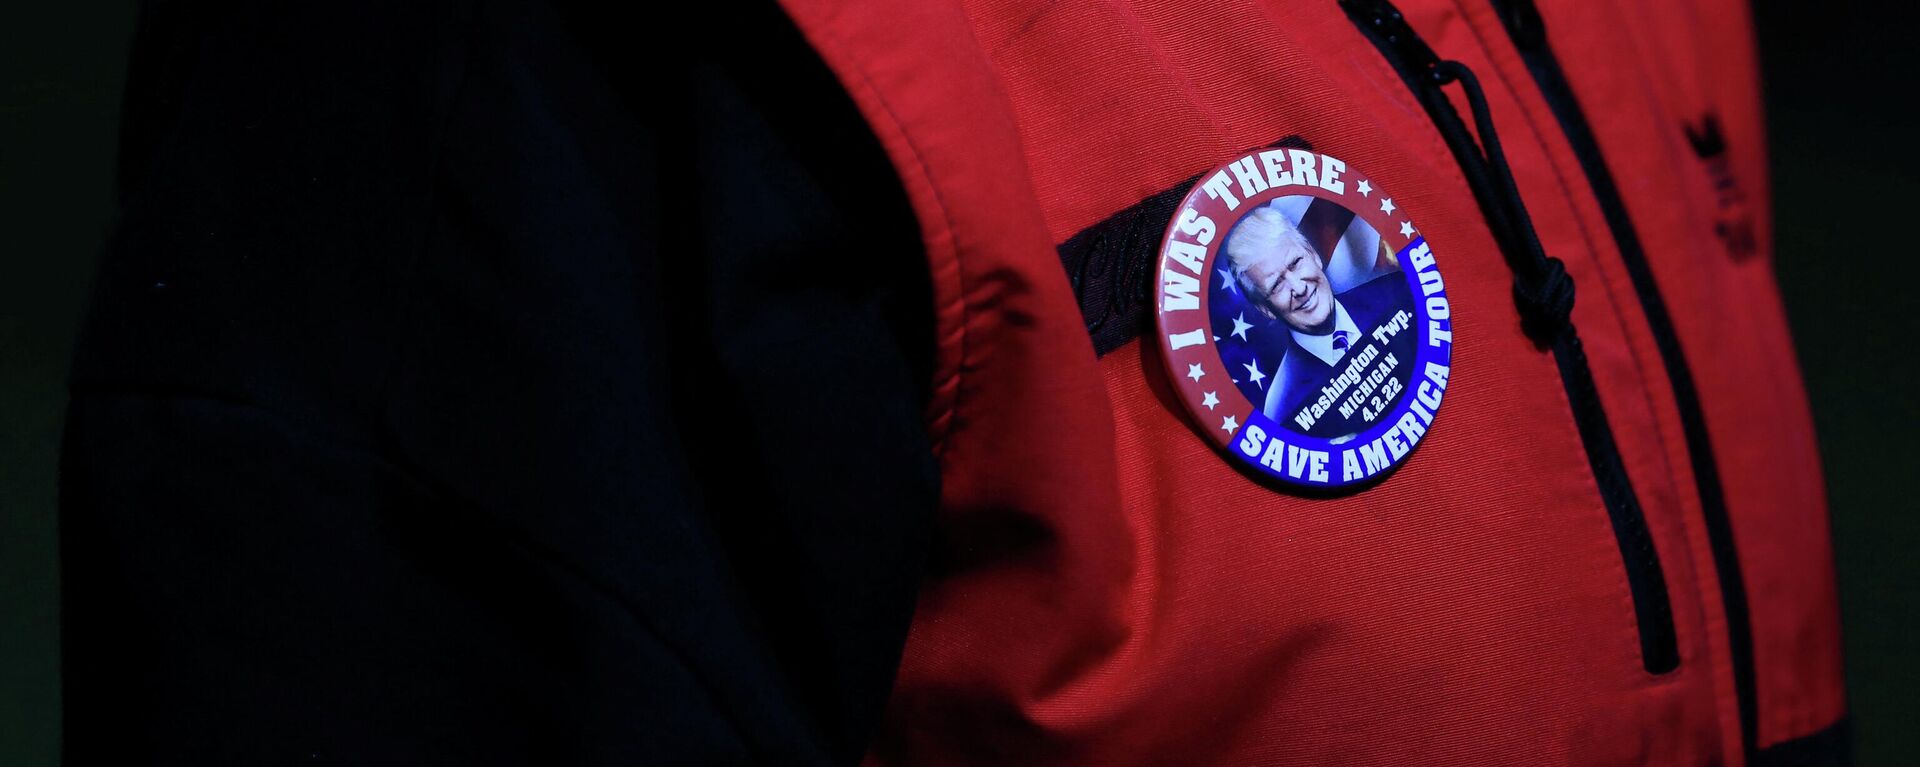 A supporter dons a pin during a rally held by former U.S. President Donald Trump in Washington Township, Michigan U.S. April 2, 2022 - Sputnik International, 1920, 06.04.2022